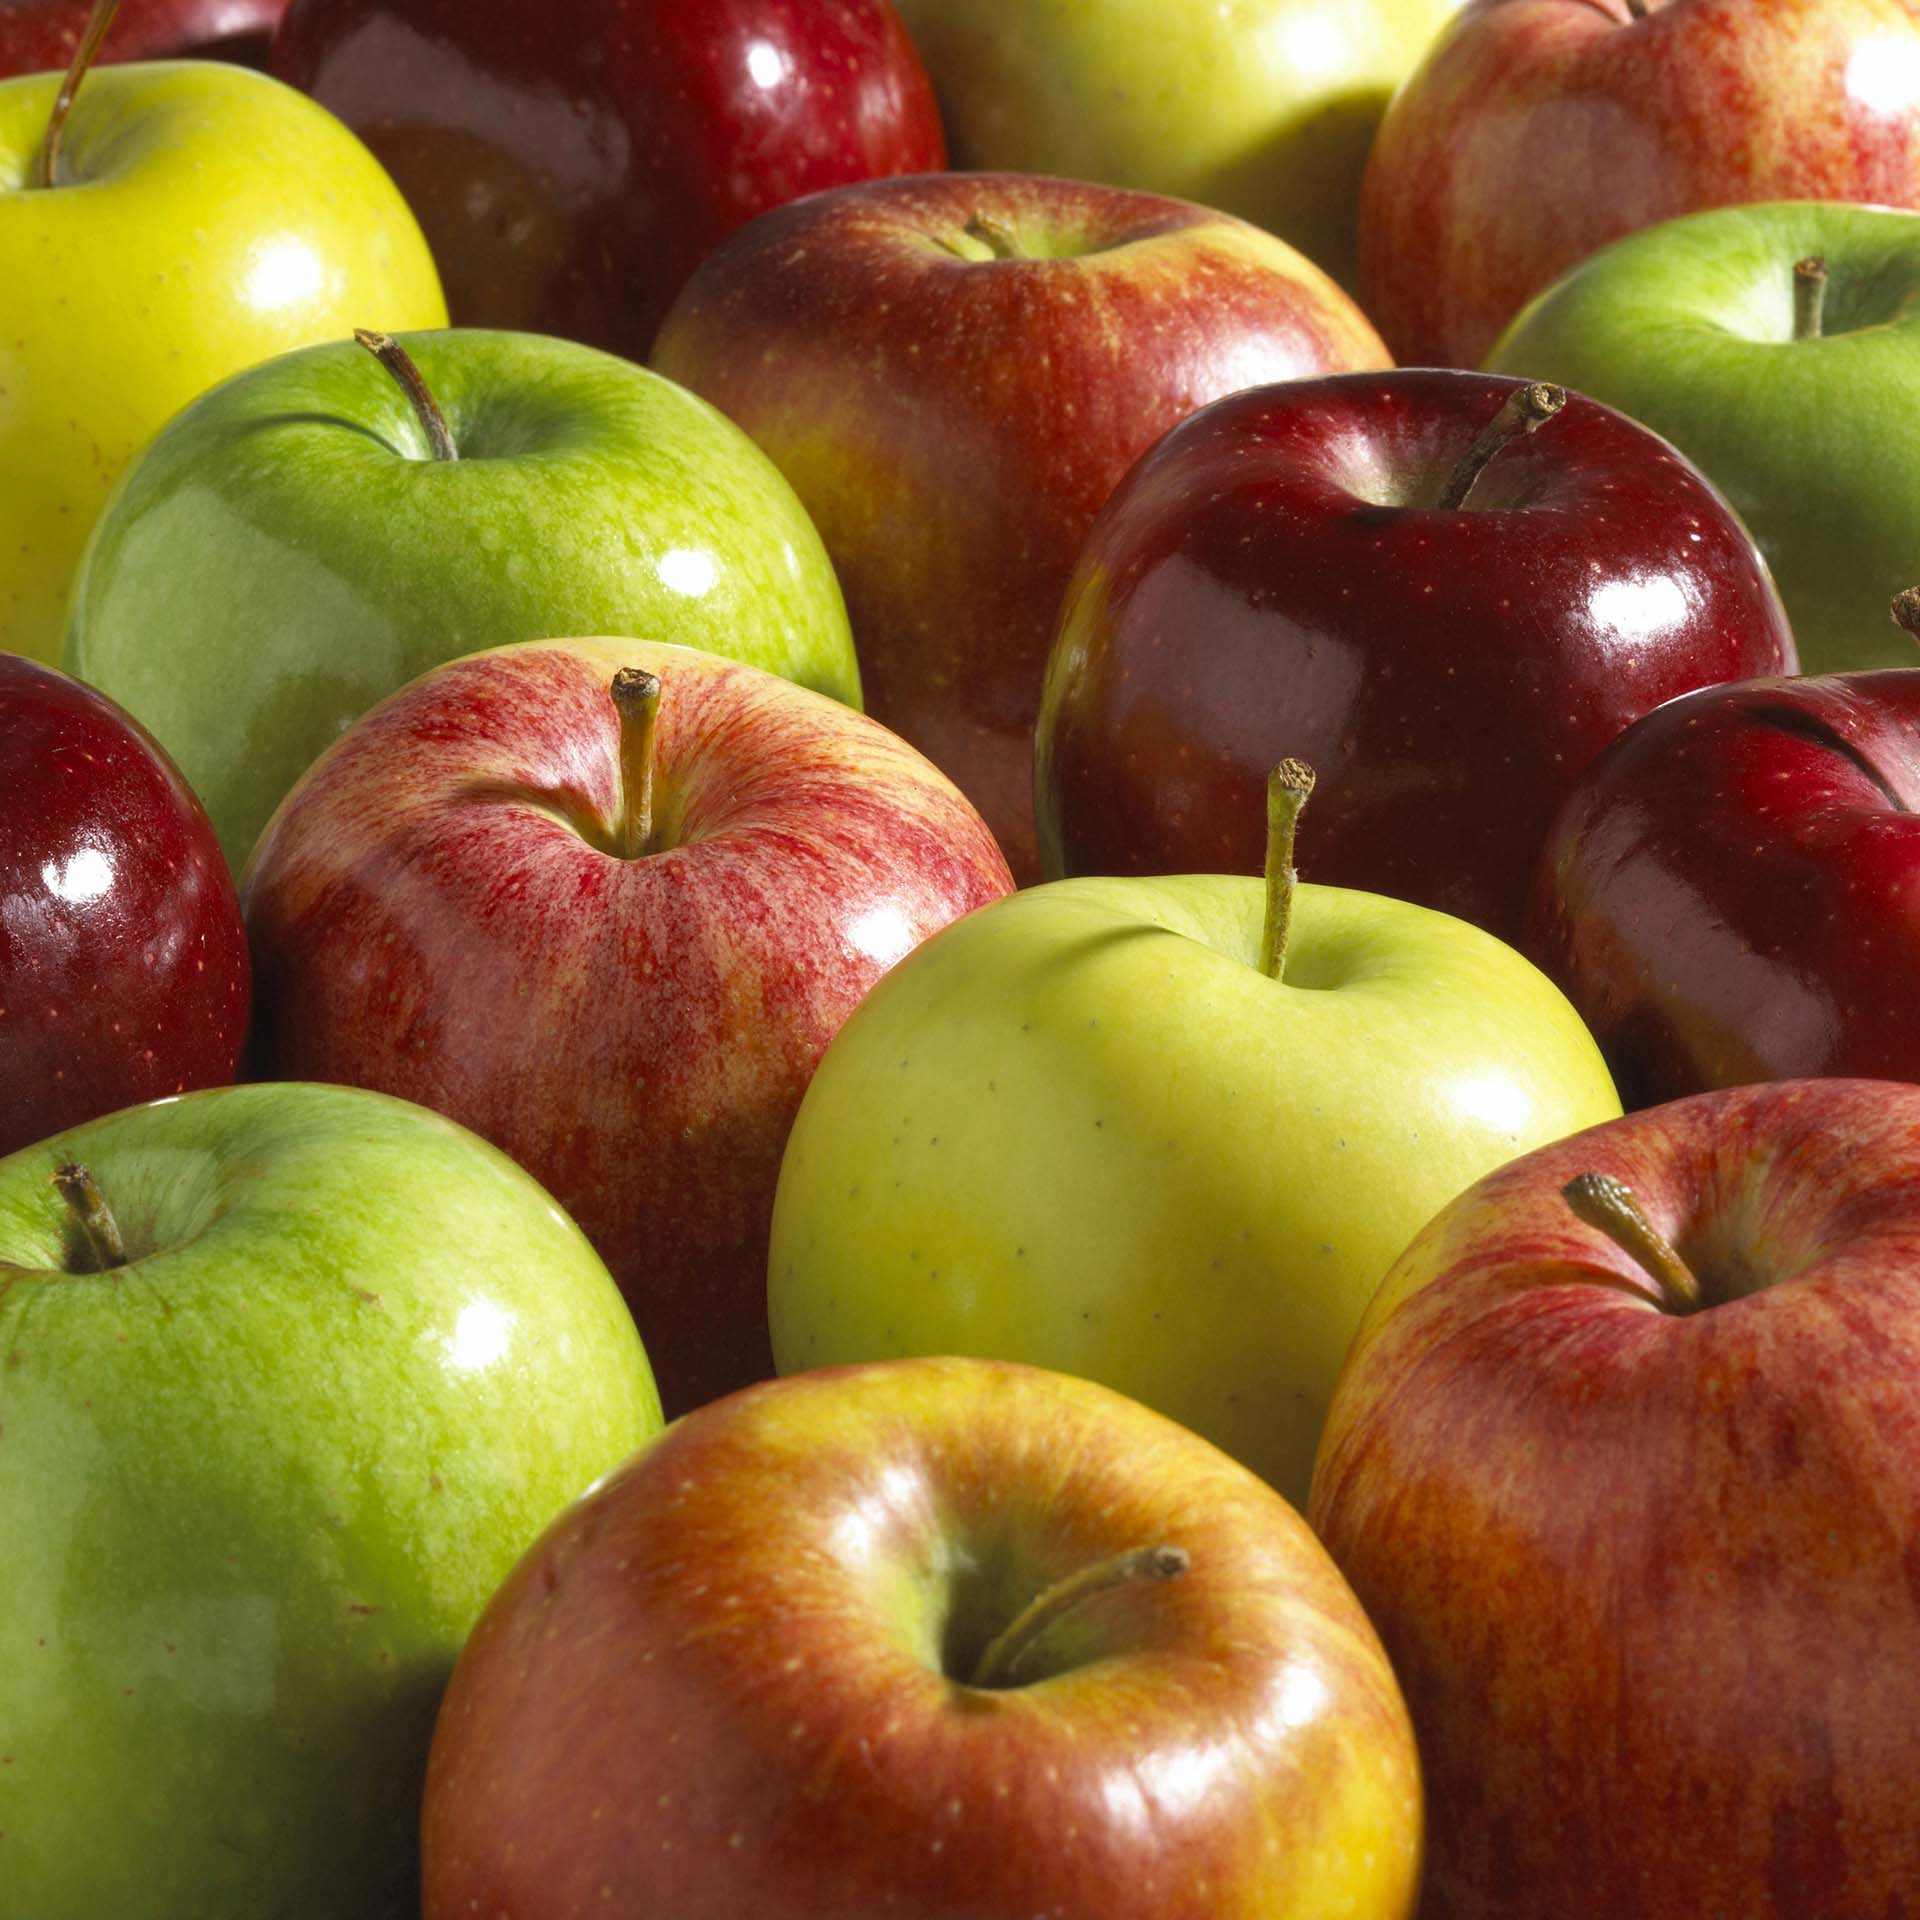 A collection of shiny red and green apples is closely arranged, highlighting their fresh and juicy appearance.